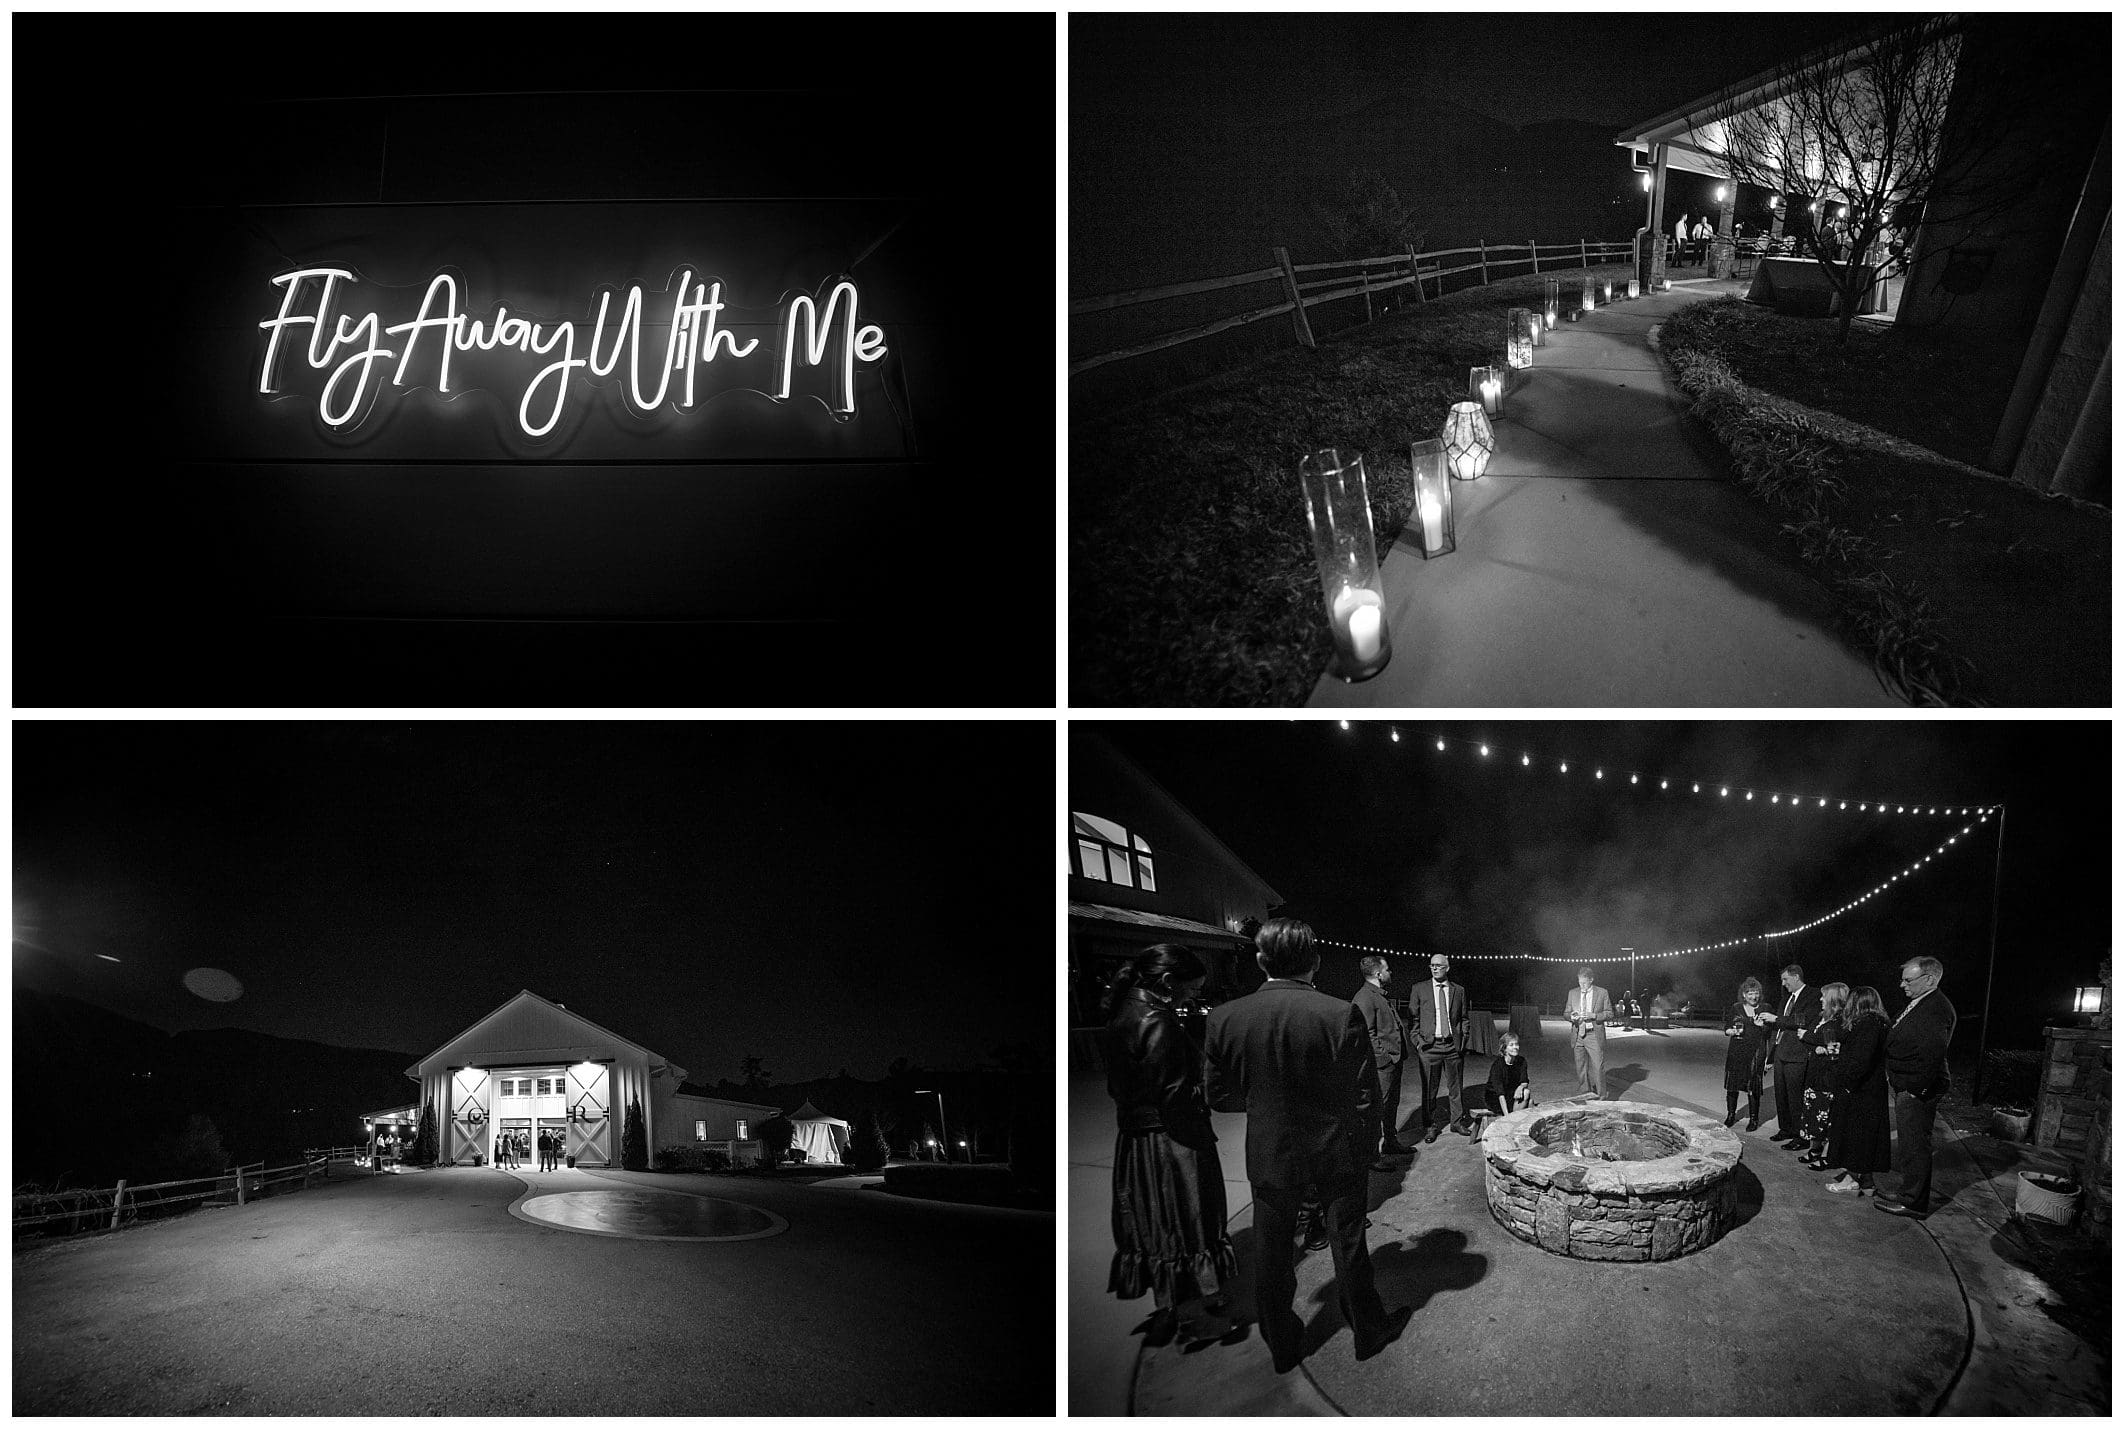 A black and white photo of a wedding reception at night.